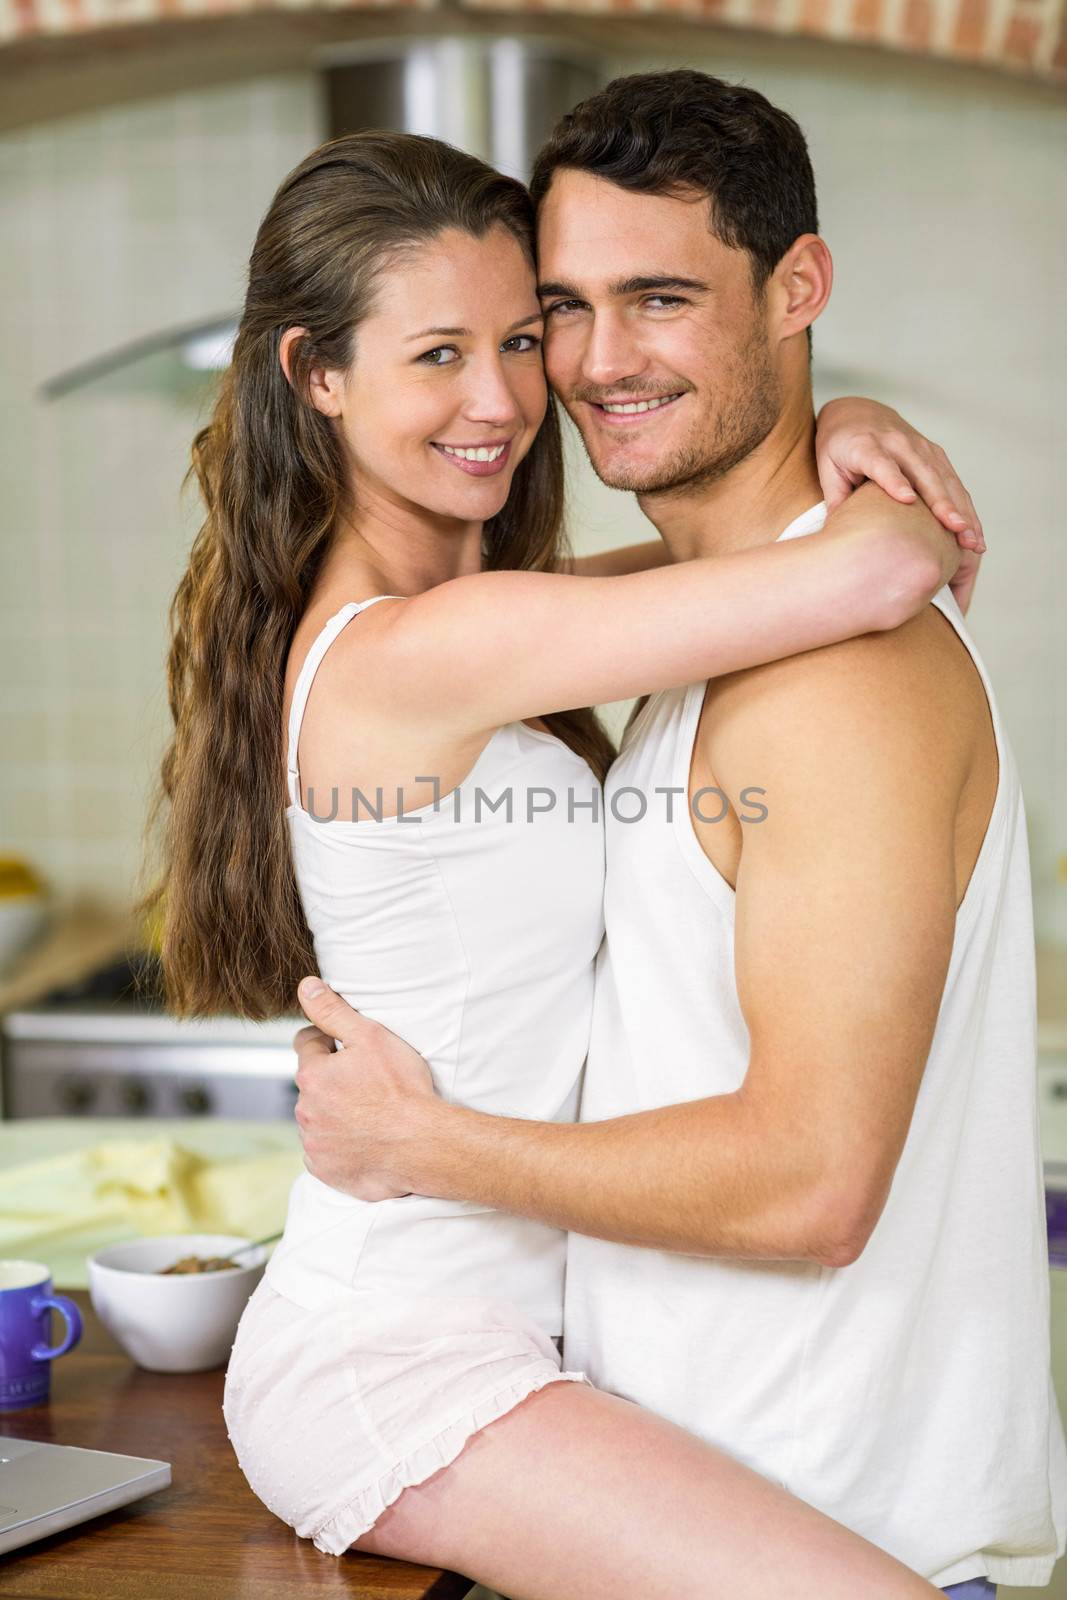 Portrait of romantic young couple cuddling on kitchen worktop